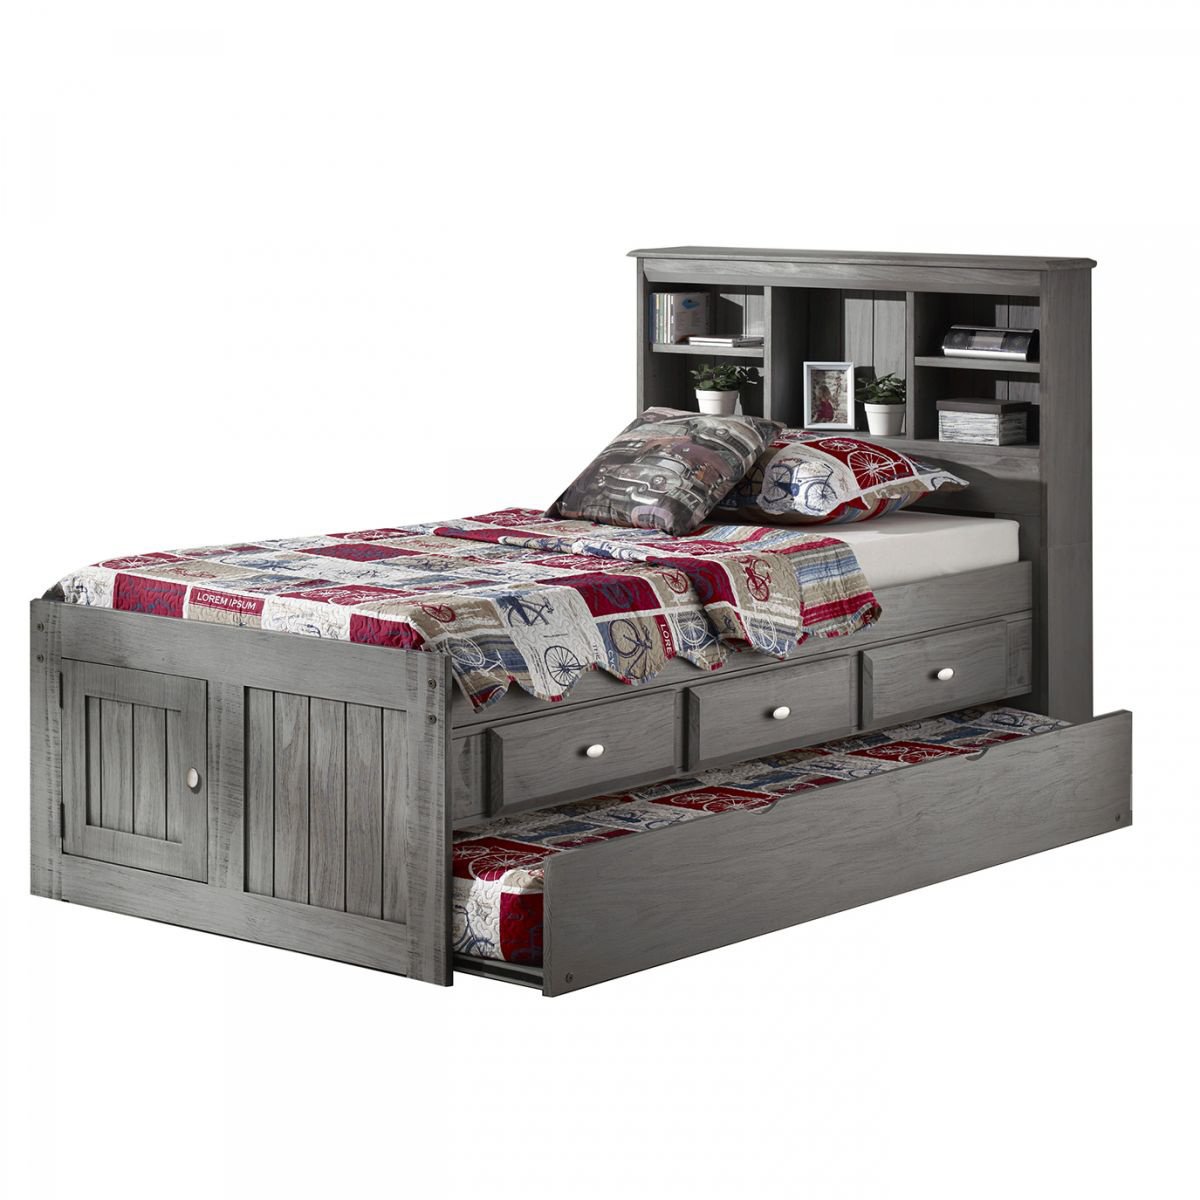 Twin Bookcase Bed With Trundle, Twin Bed Frame And Trundle